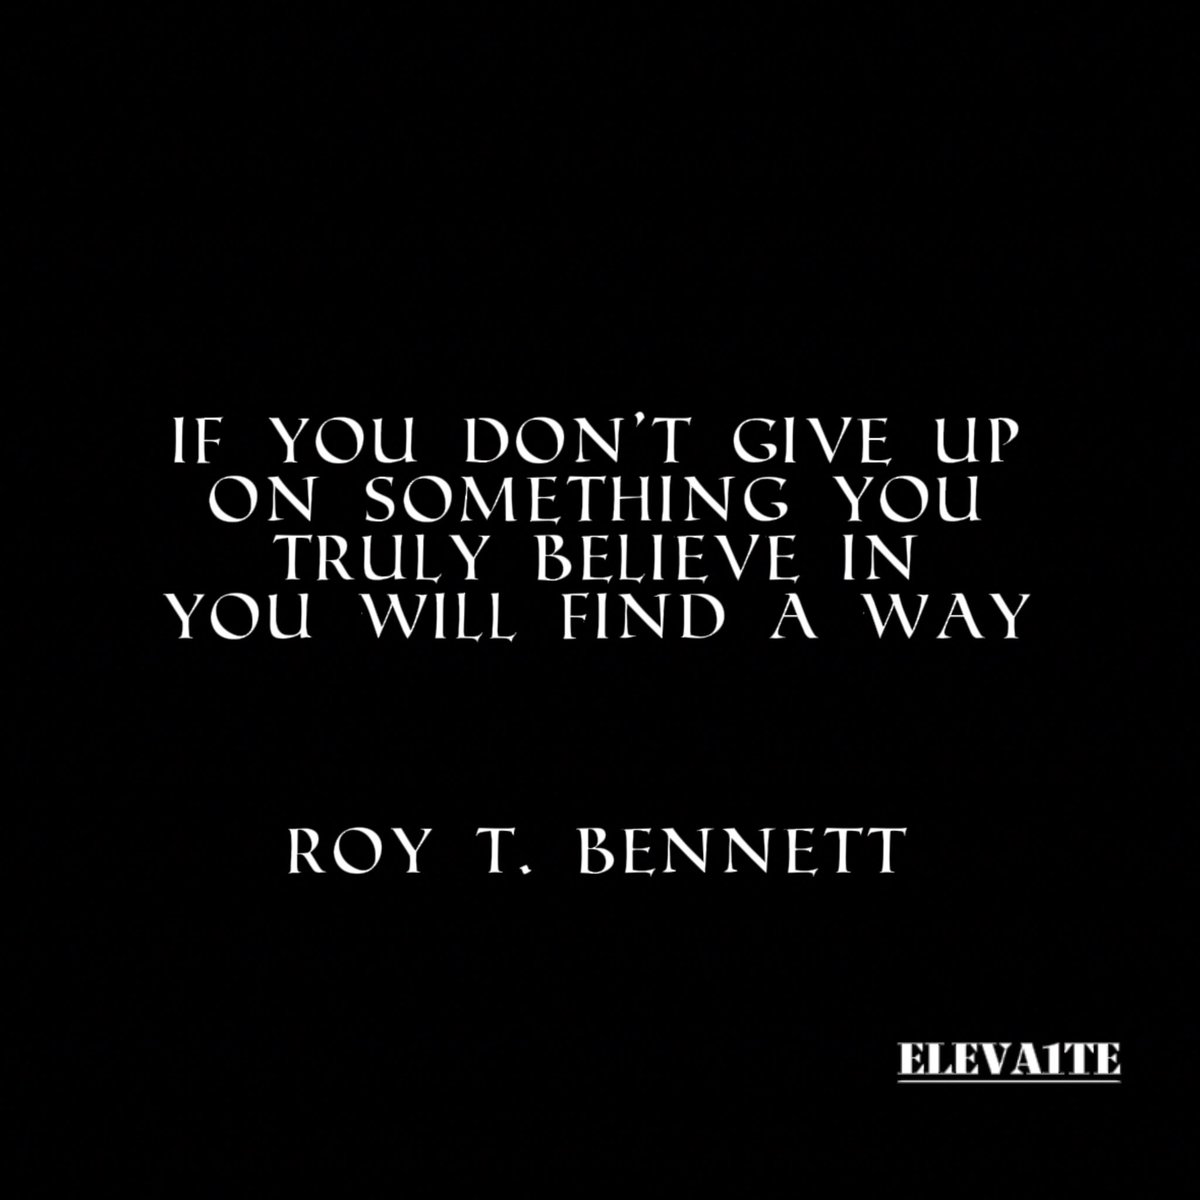 Believe Persist Succeed There's Always A Way Forward For Those Who Refuse To Give Up #eleva1te #eleva1te100 #r1zefocusconquer #motivationalquotes #motivationquotes #motivateyourself #chosenone #consistencyiskey #hardworkpaysoff #RiseTogether #dreamchaser #LearnAndGrind #grind